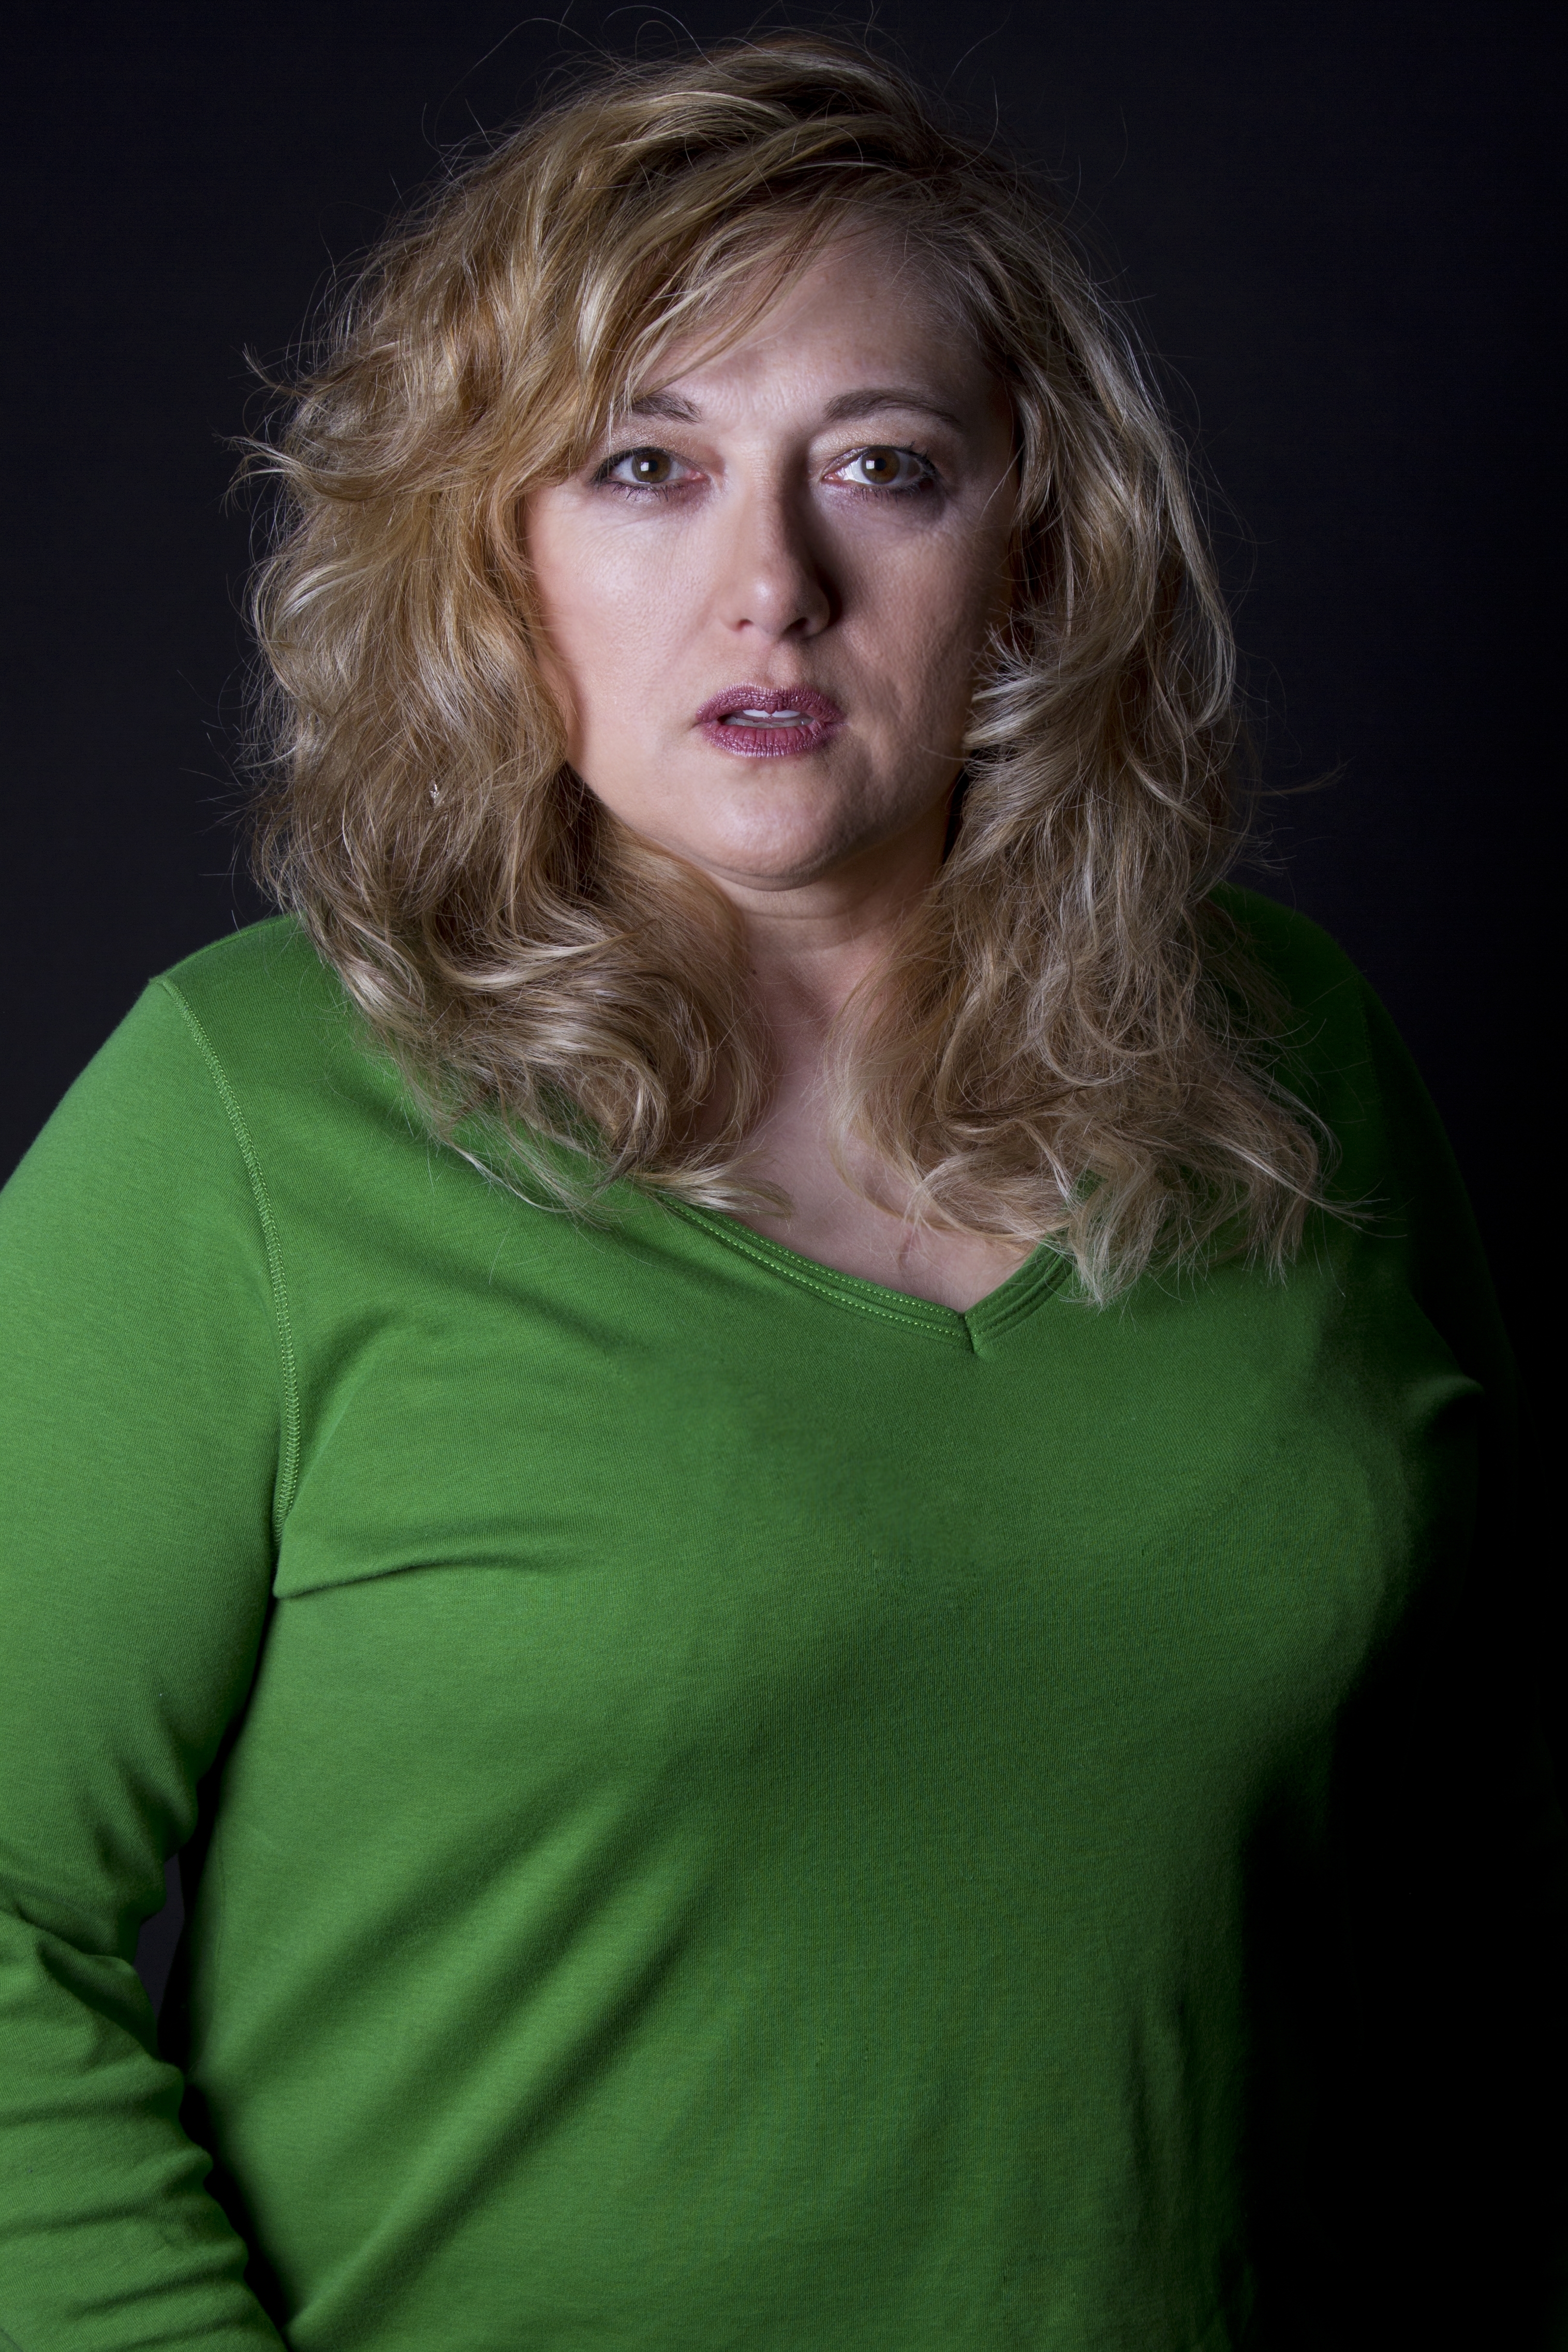 Sandra Doolittle Actor, Producer and Law Enforcement consultant/Technical Advisor to the film industry